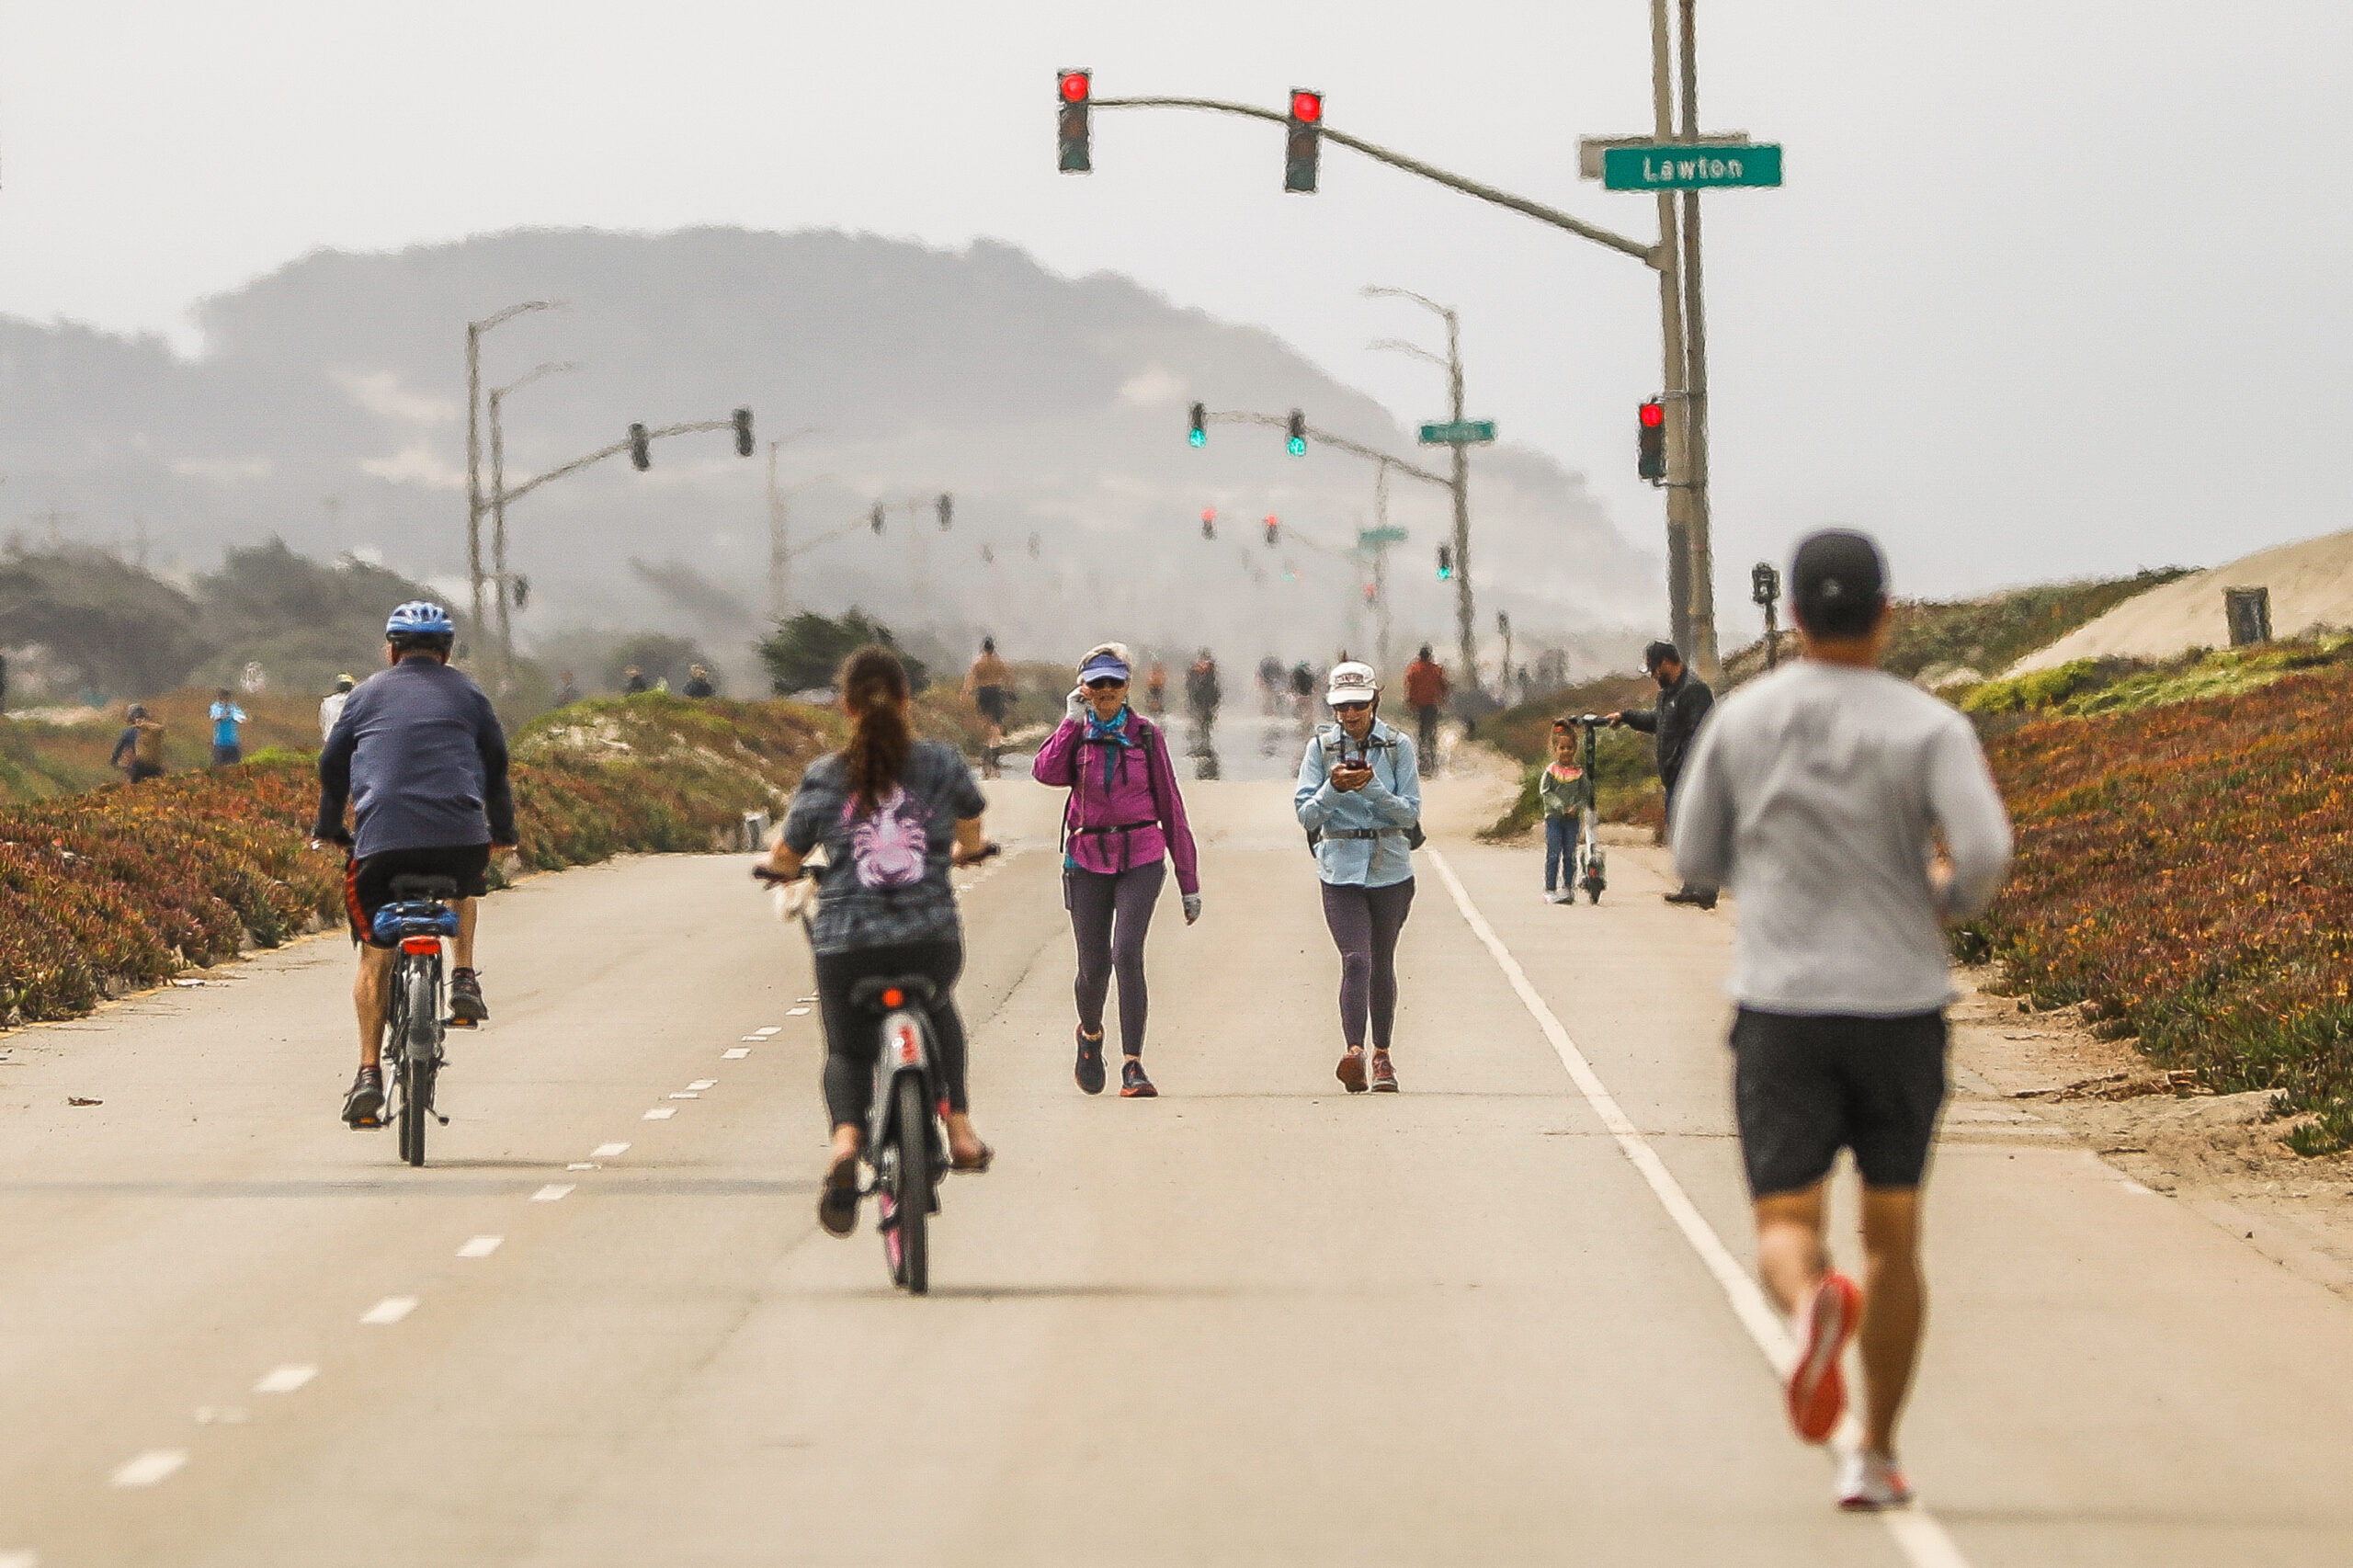 A road with cyclists, walkers, and a runner, with traffic lights overhead and foggy hills in the distance.